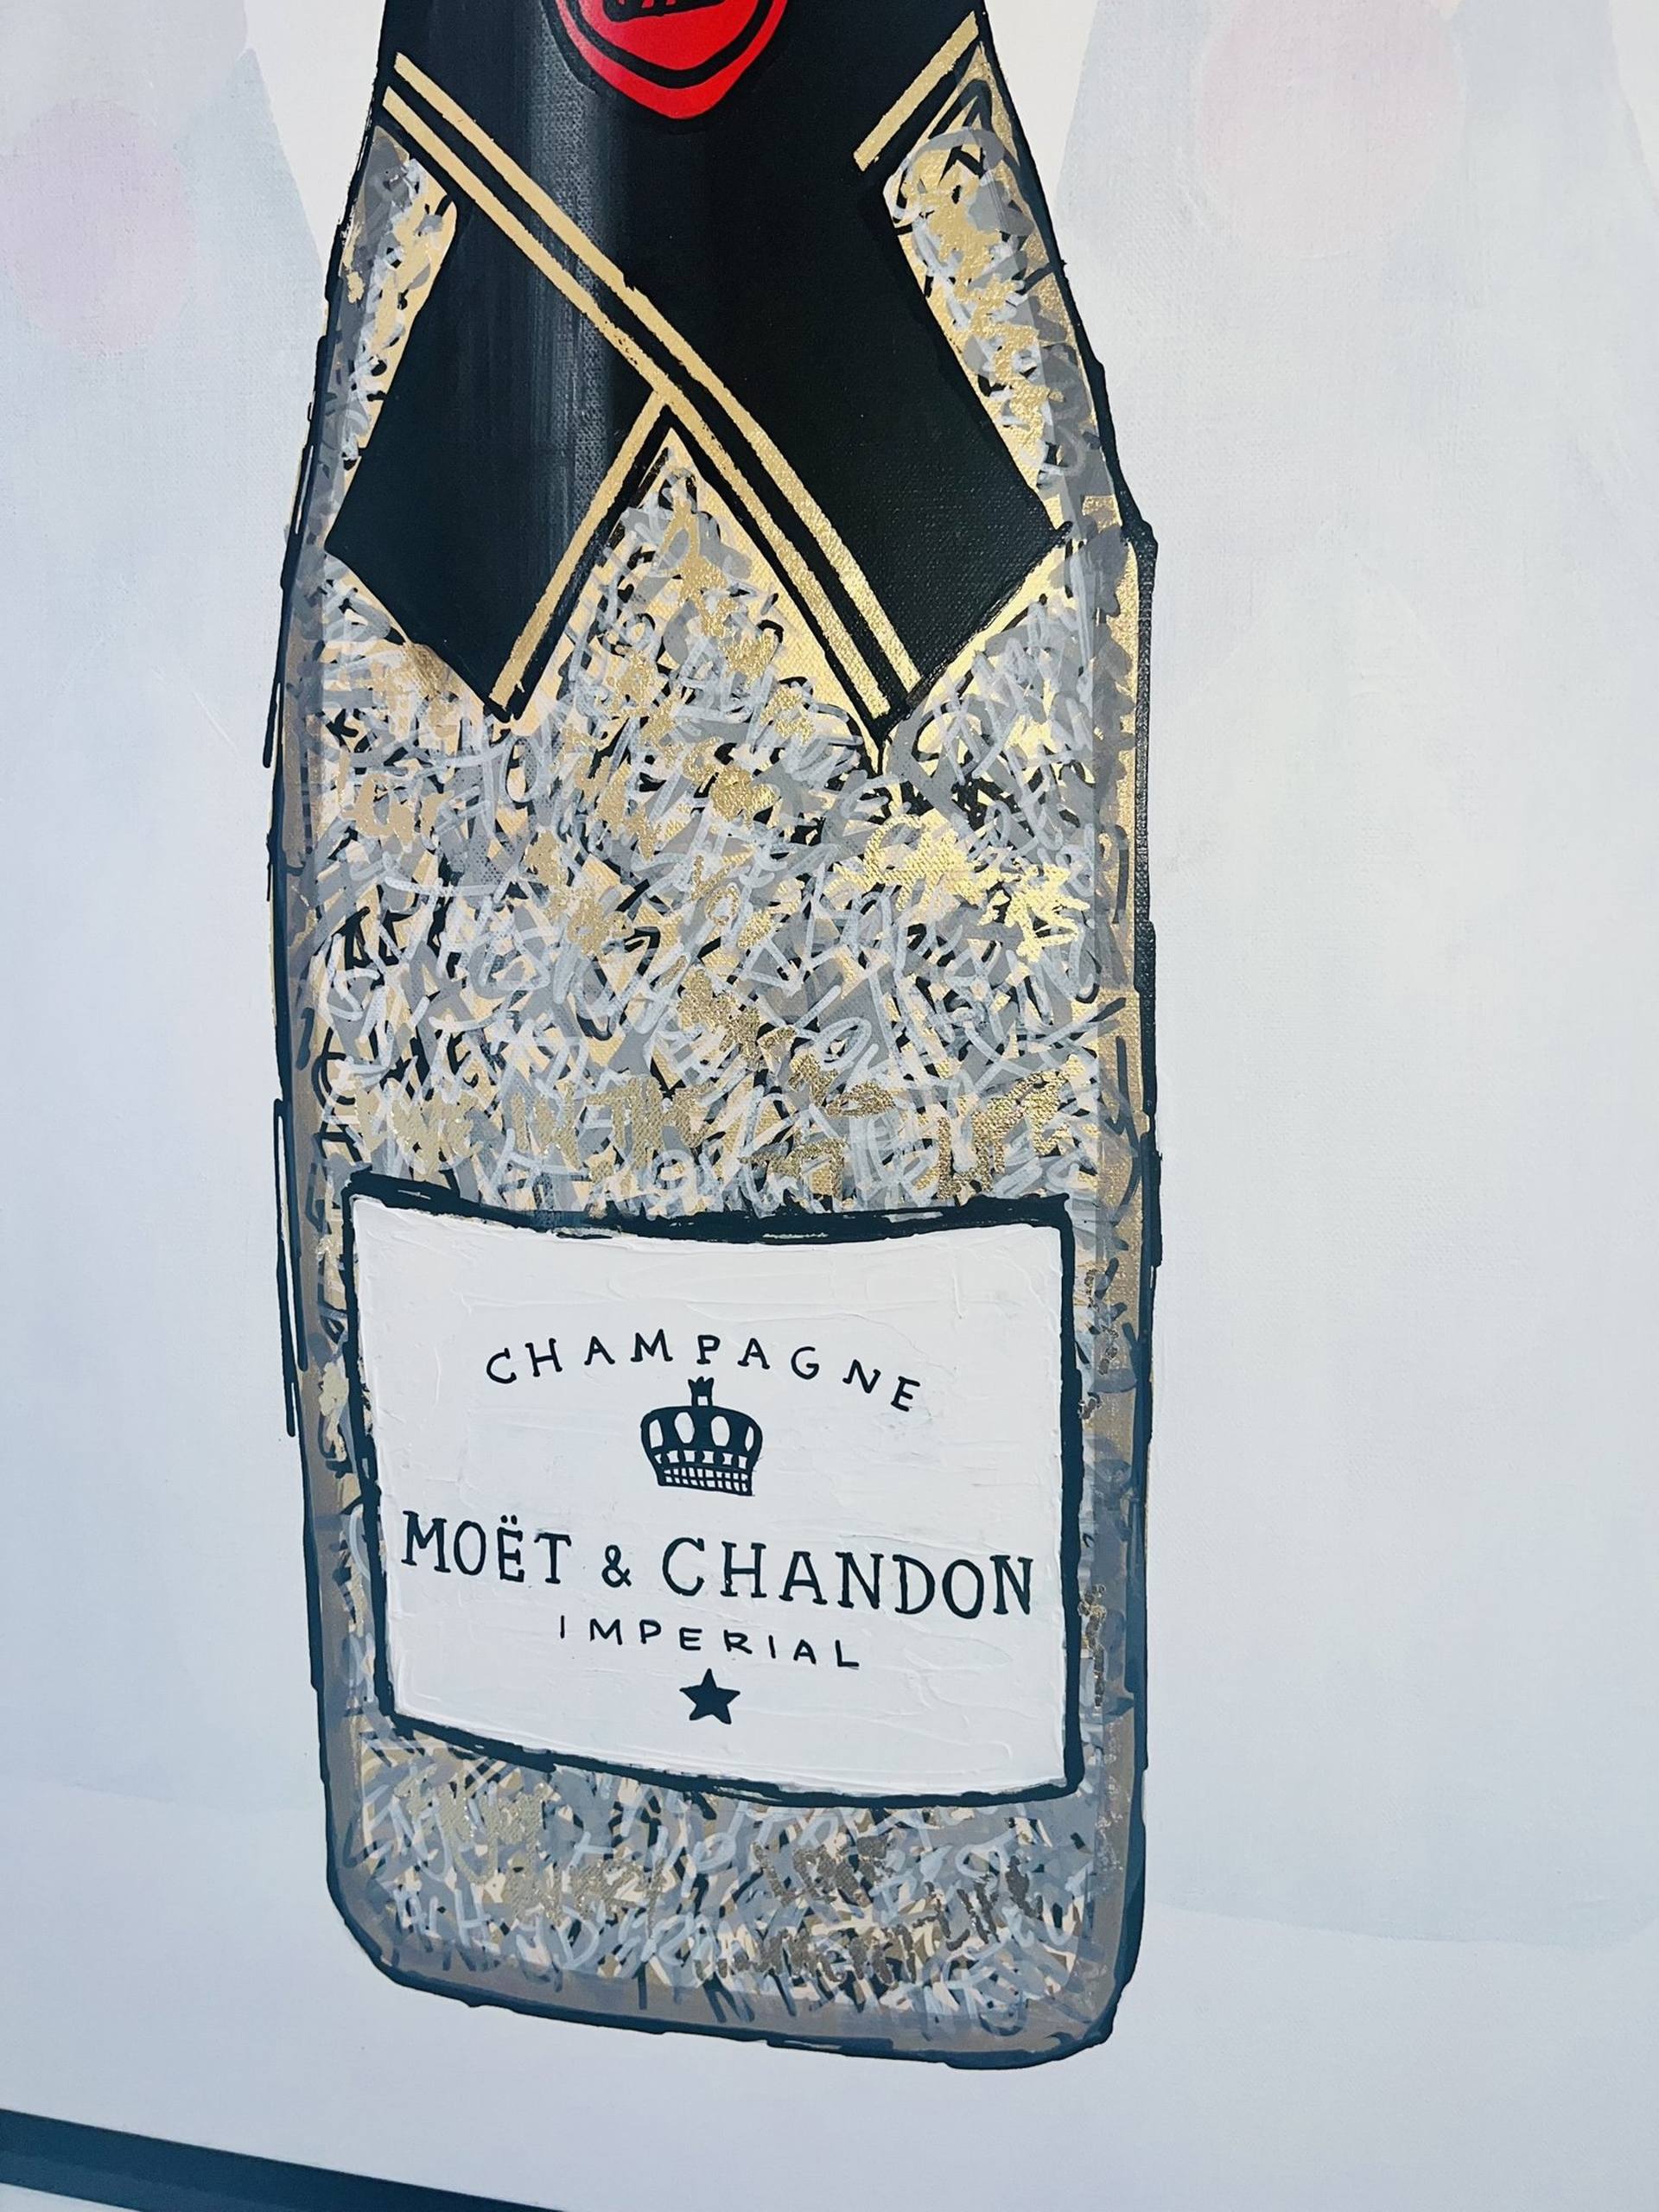 Moet Gold Mixed Media by Michelle Sparks